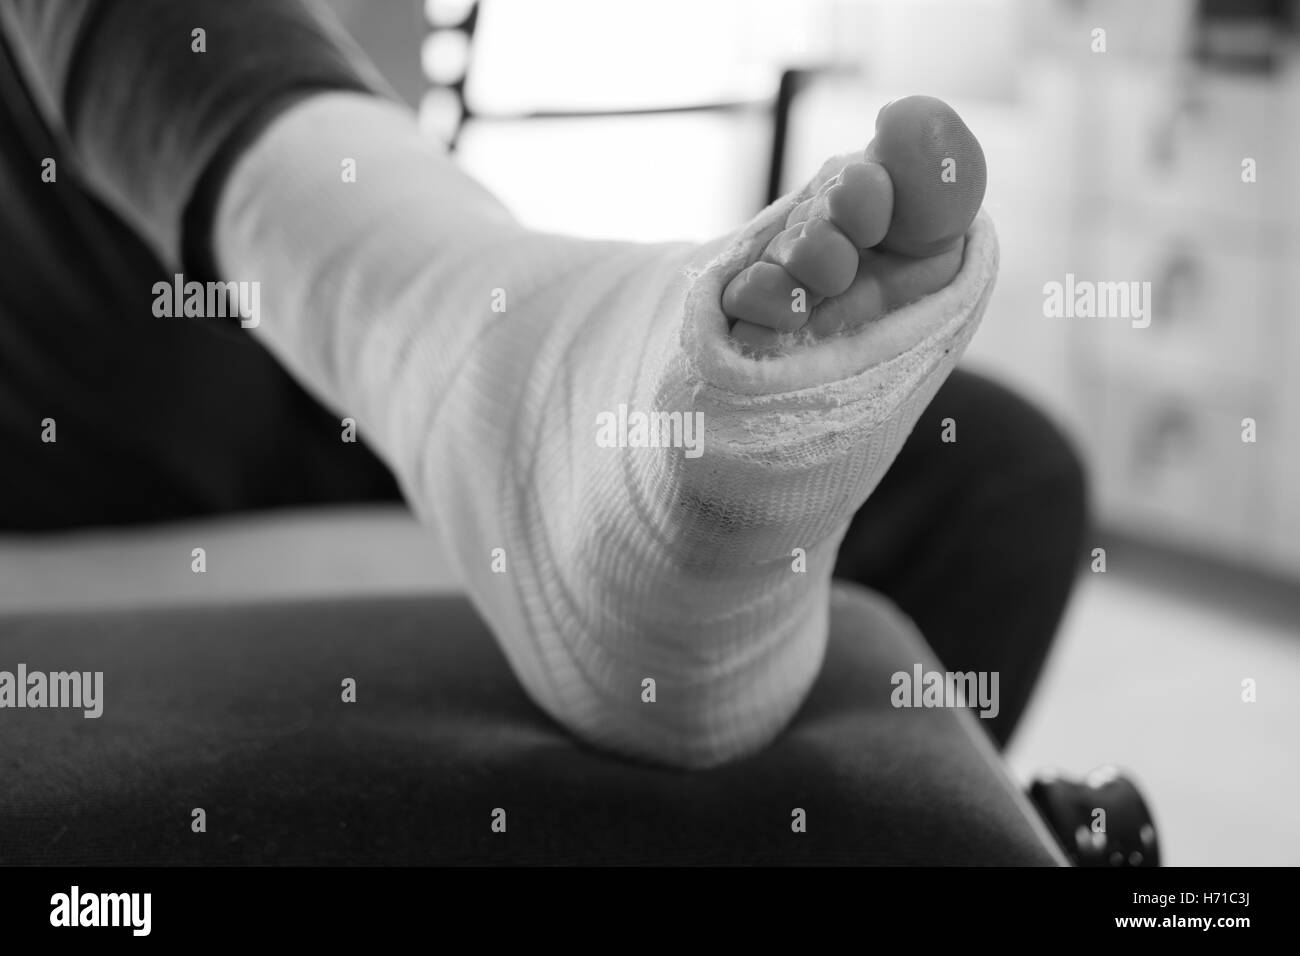 Close up of a young man's fiberglass / Plaster leg cast and toes after a running injury (black & white) Stock Photo